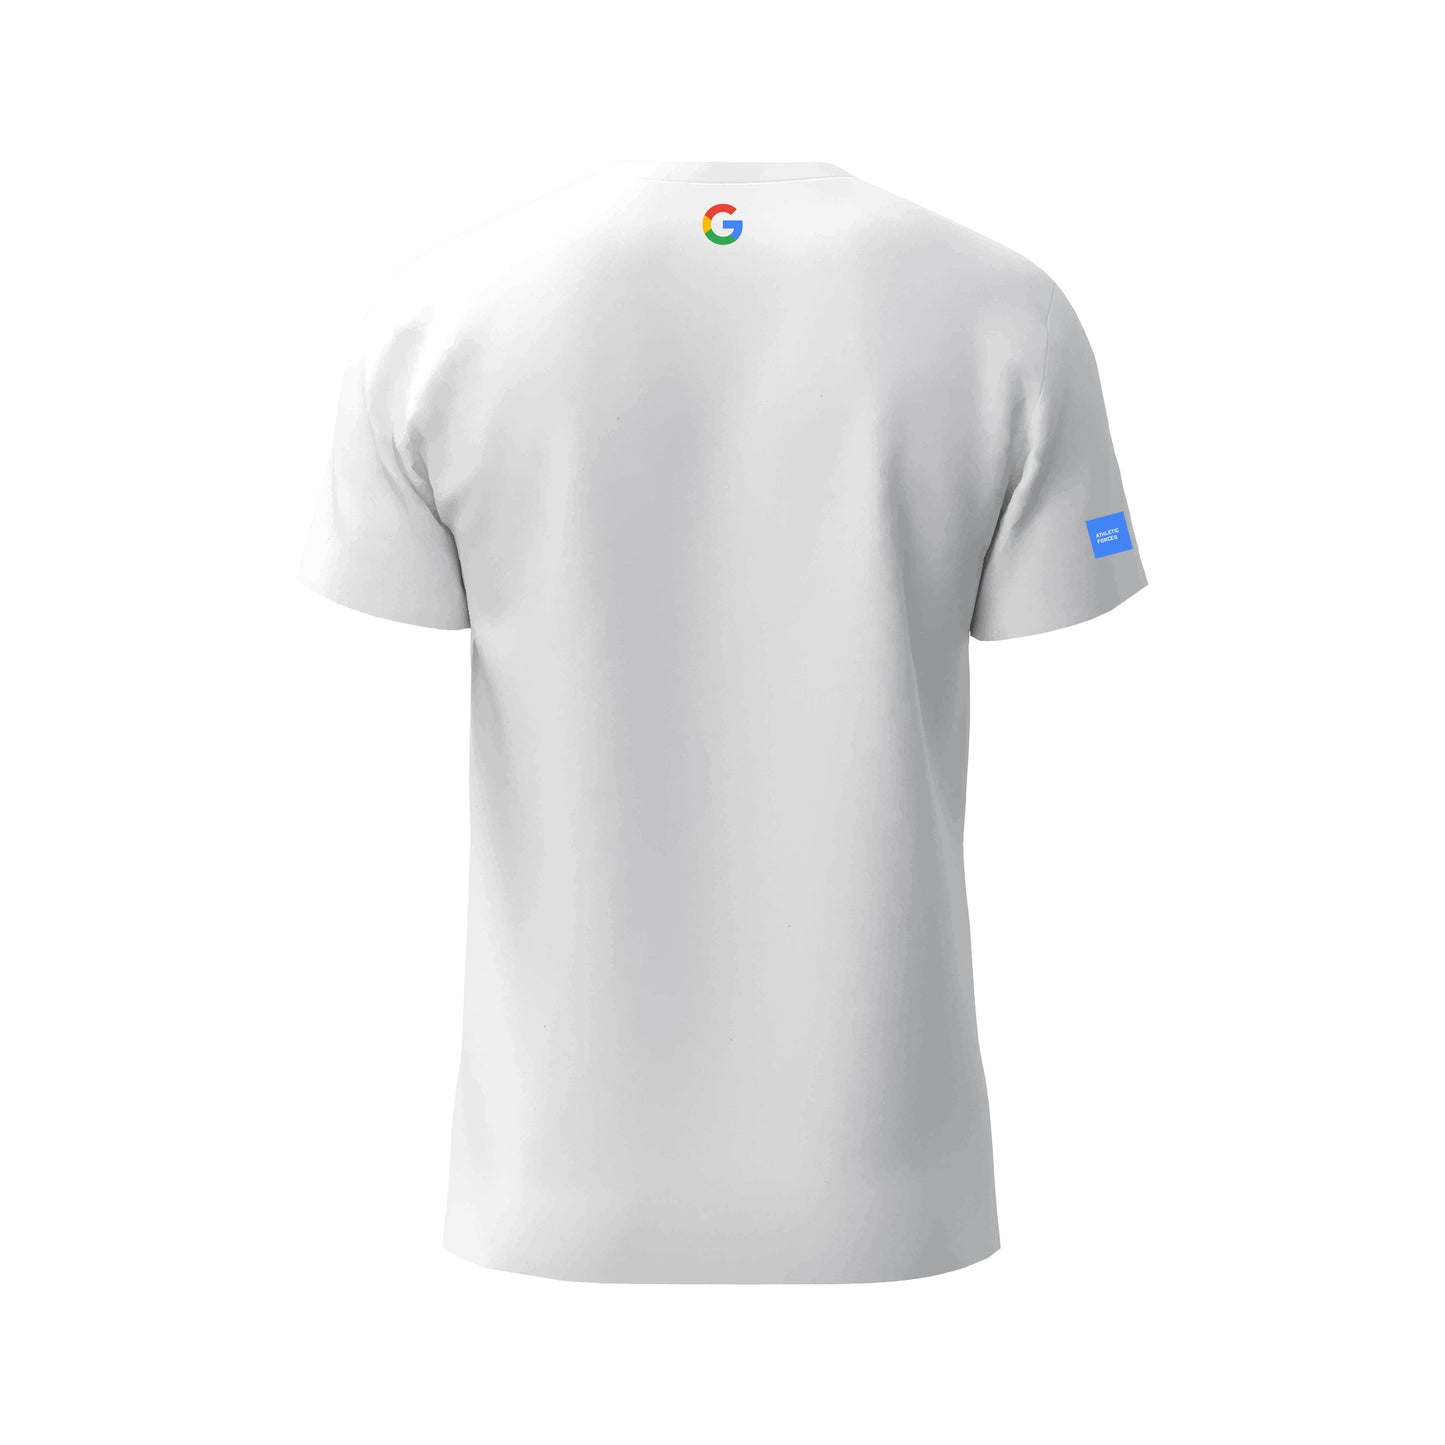 Google - Mind Force ® T-Shirt by Athletic Forces -  Model 3